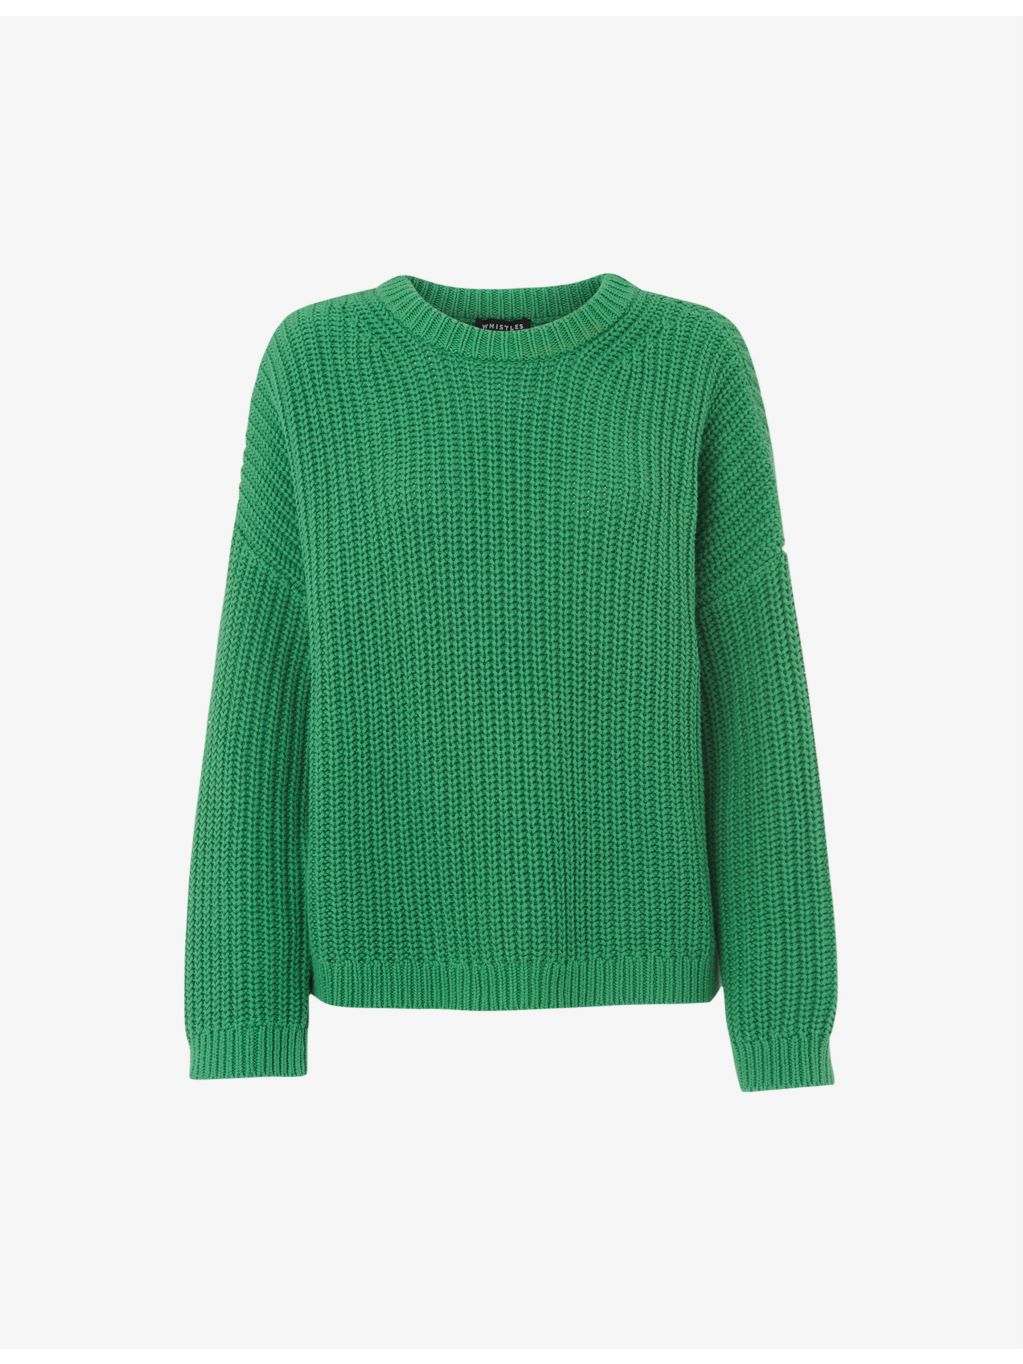 WHISTLES - Pria chunky knit cotton jumper